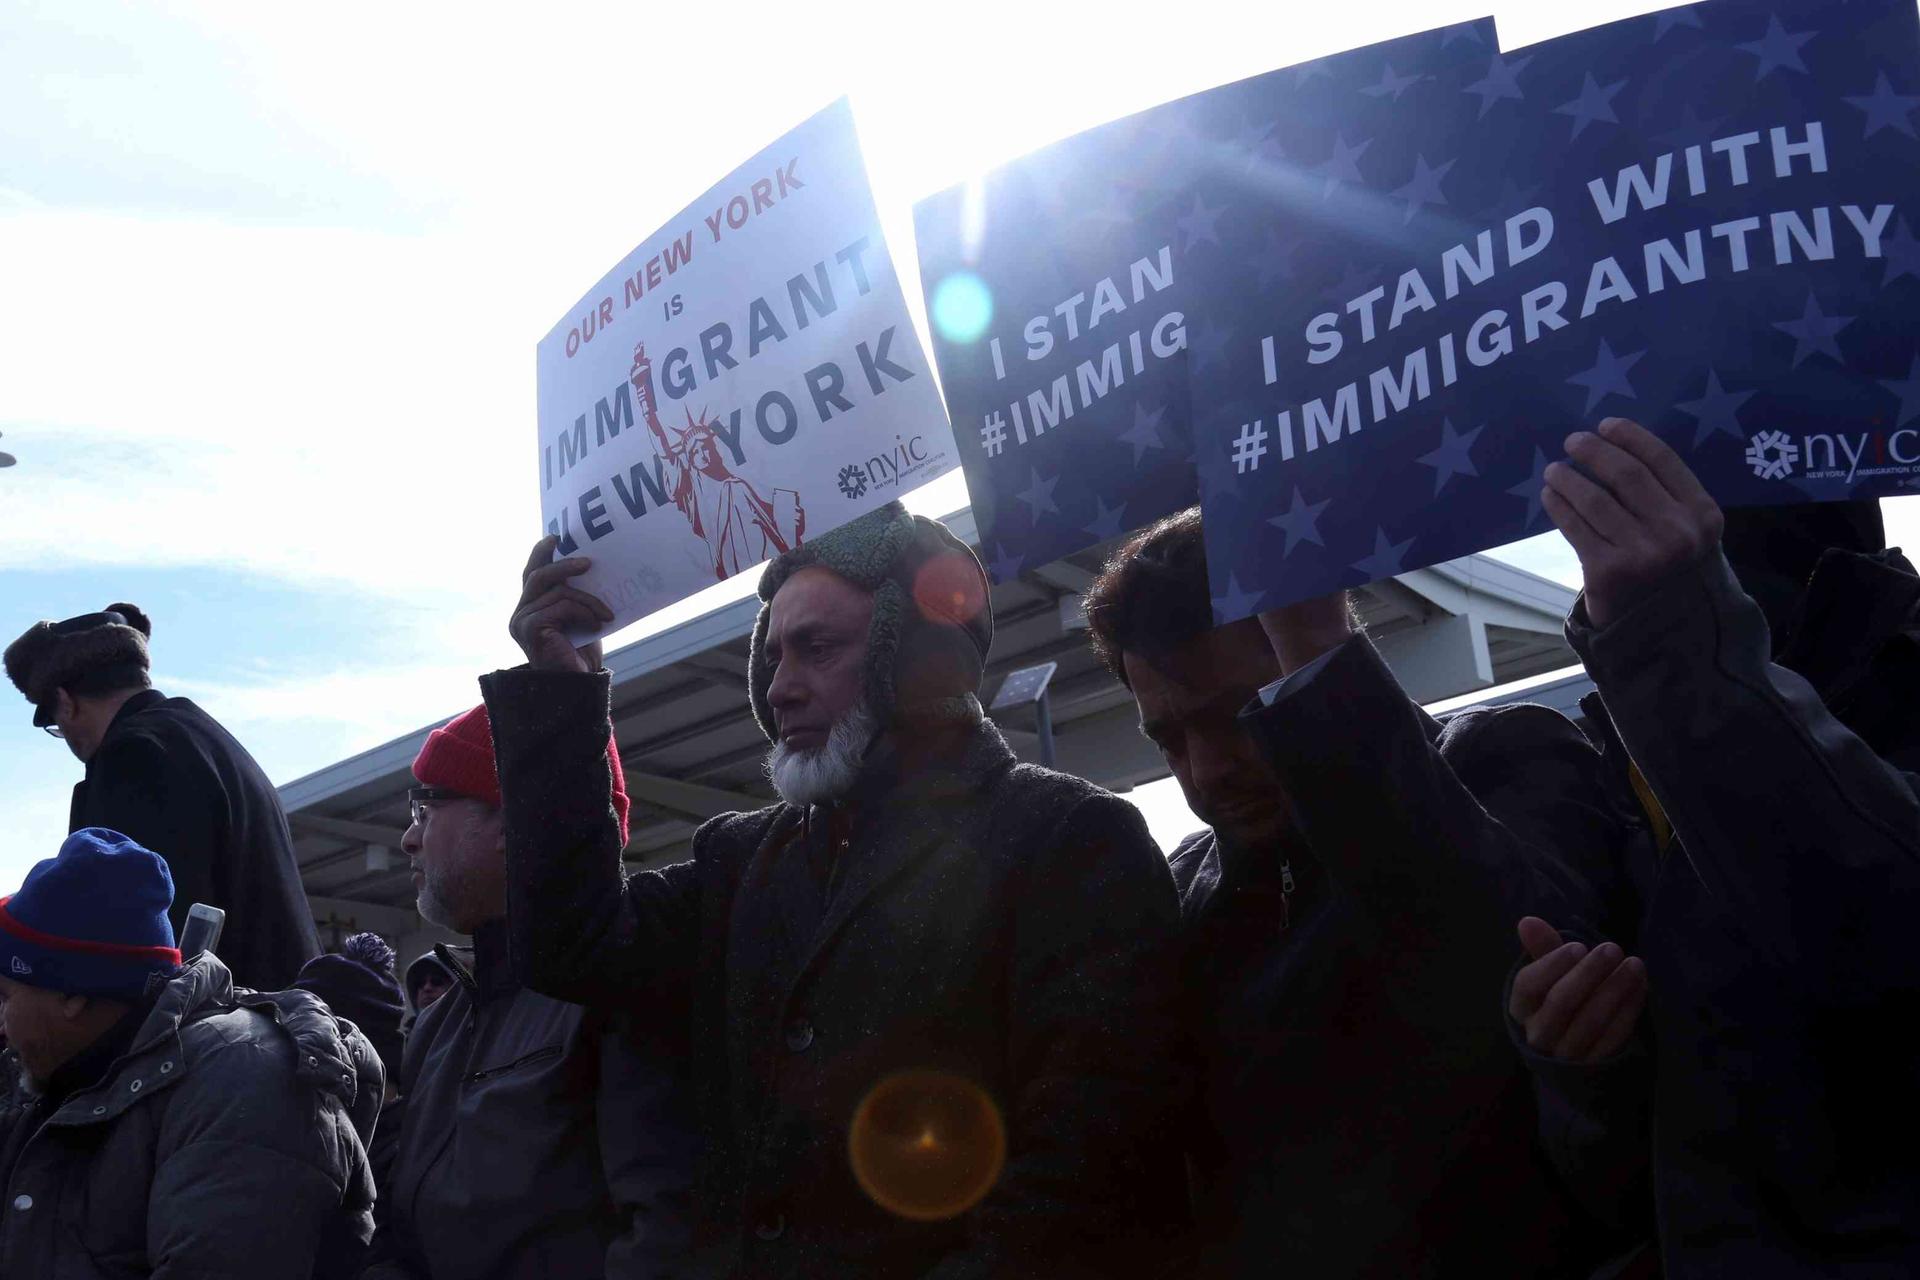 People hold signs during an interfaith action and Jummah prayer outside Terminal 4 at John F. Kennedy Airport in New York, U.S., February 3, 2017.